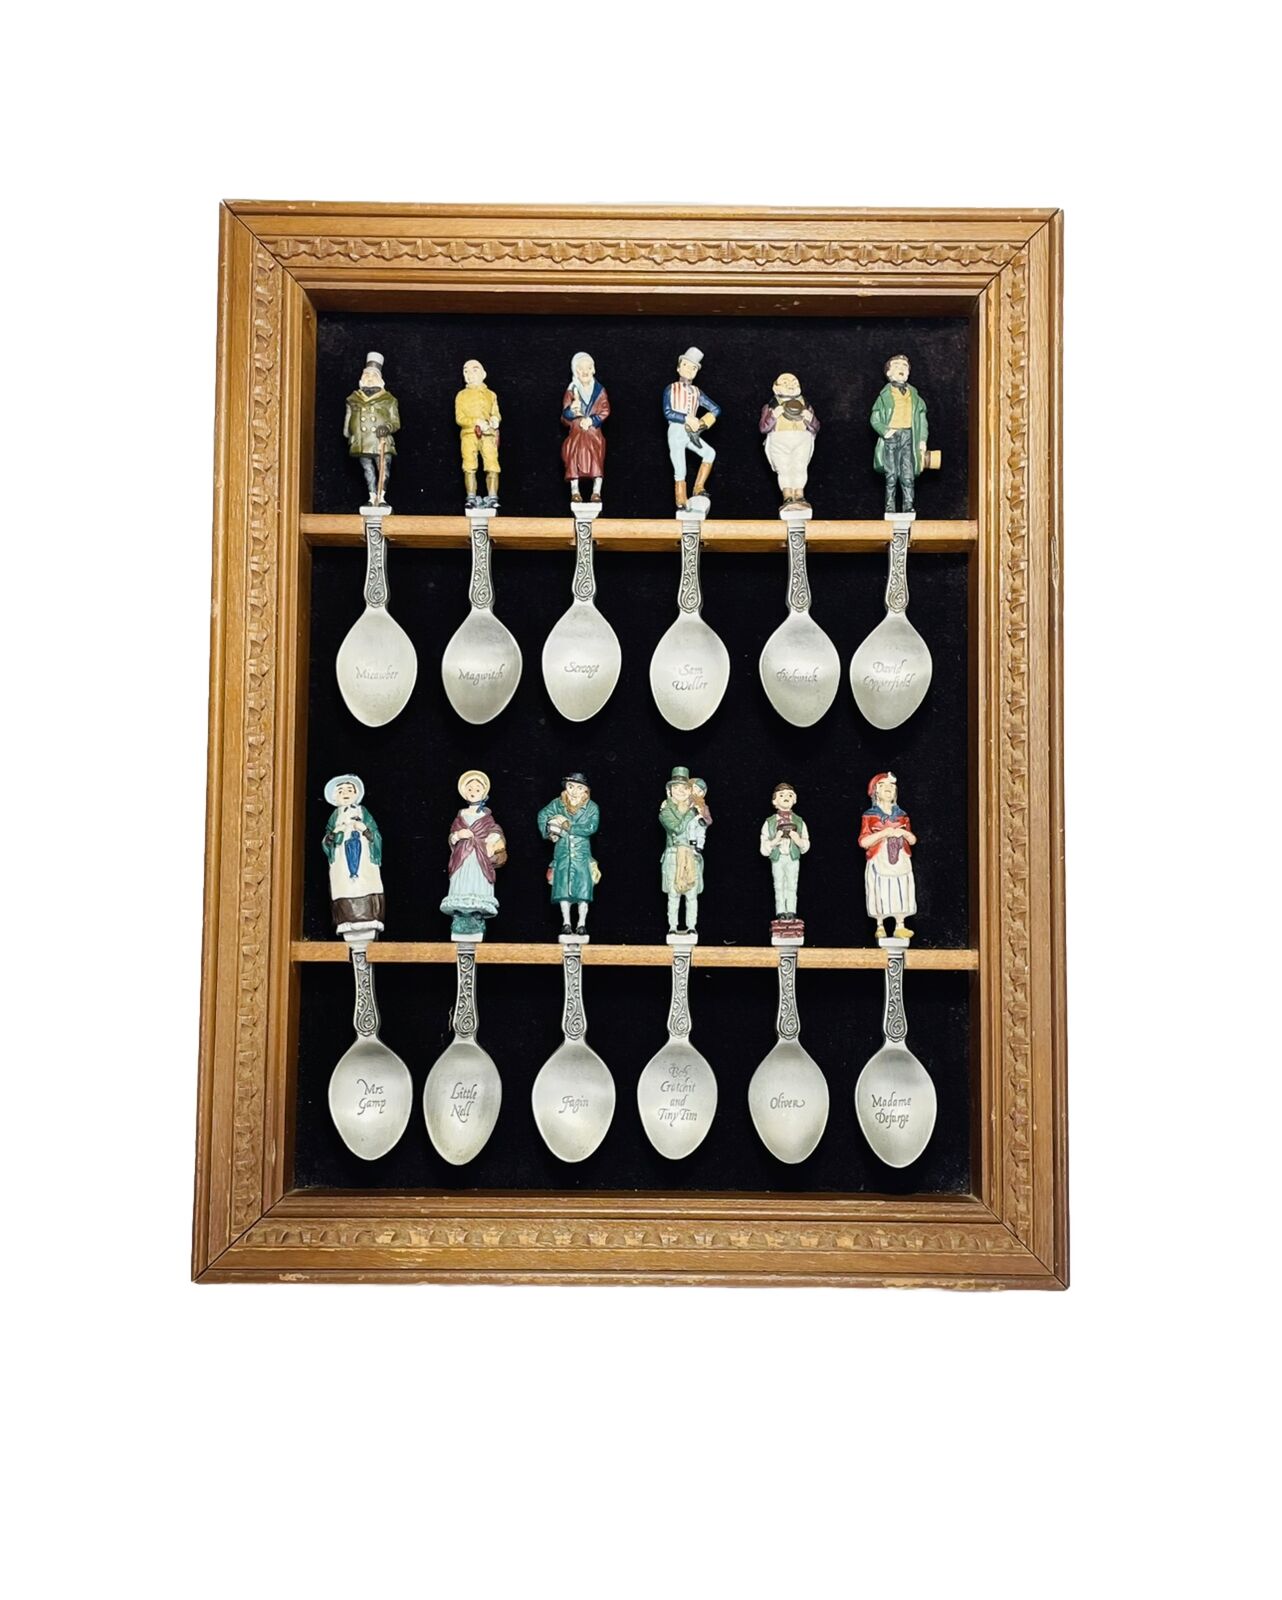 Vtg Franklin Mint Dickens Characters Spoon Set of 12 w Display Case Collectible